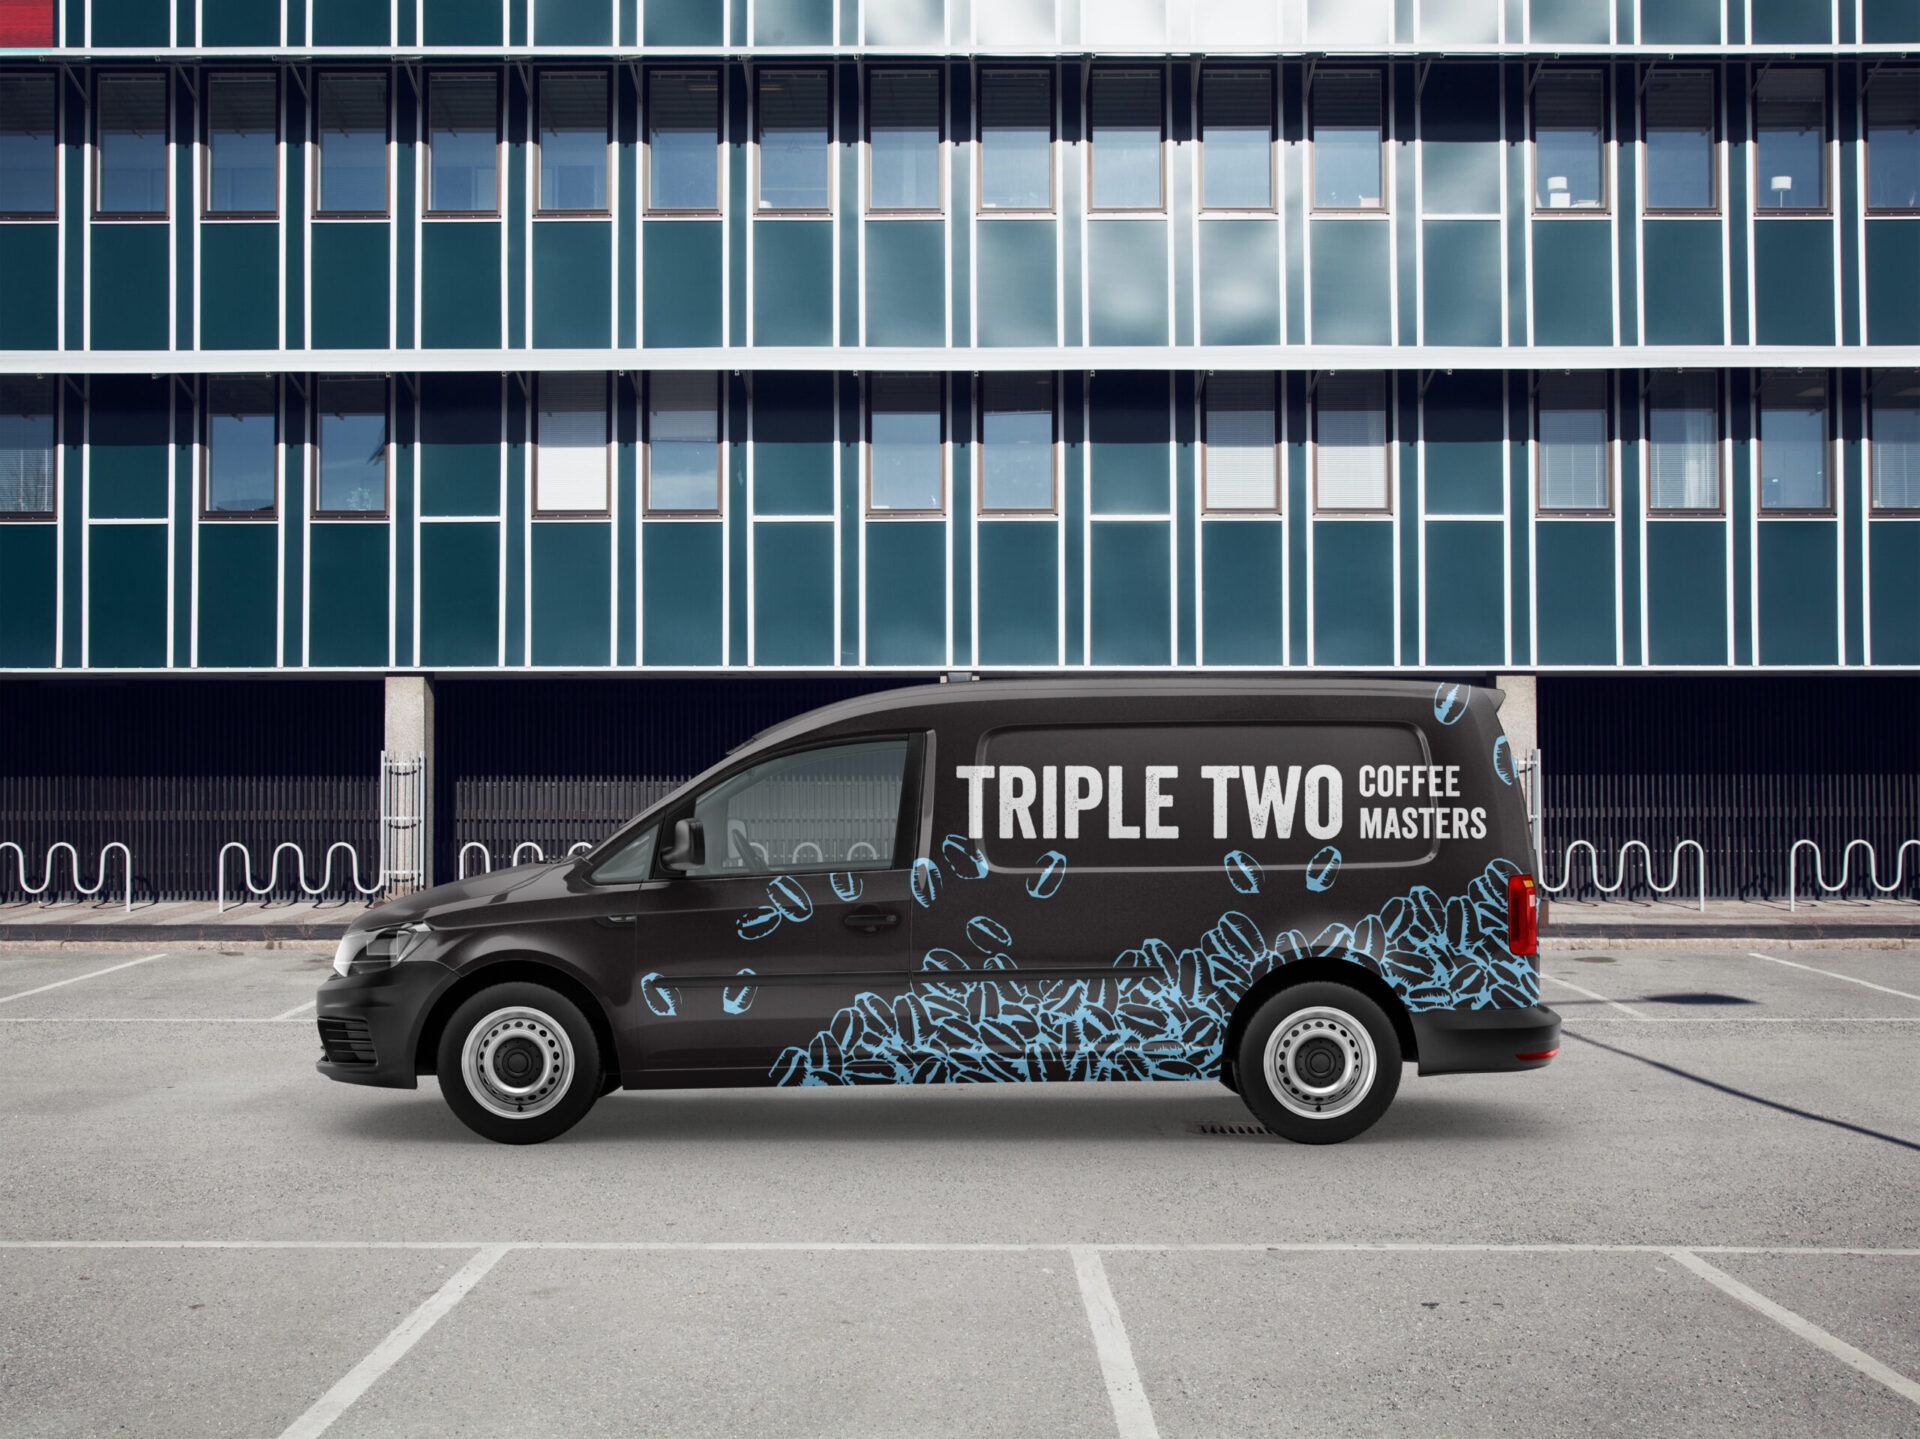 Triple Two Coffee to deploy “COVID-proof” mobile vans